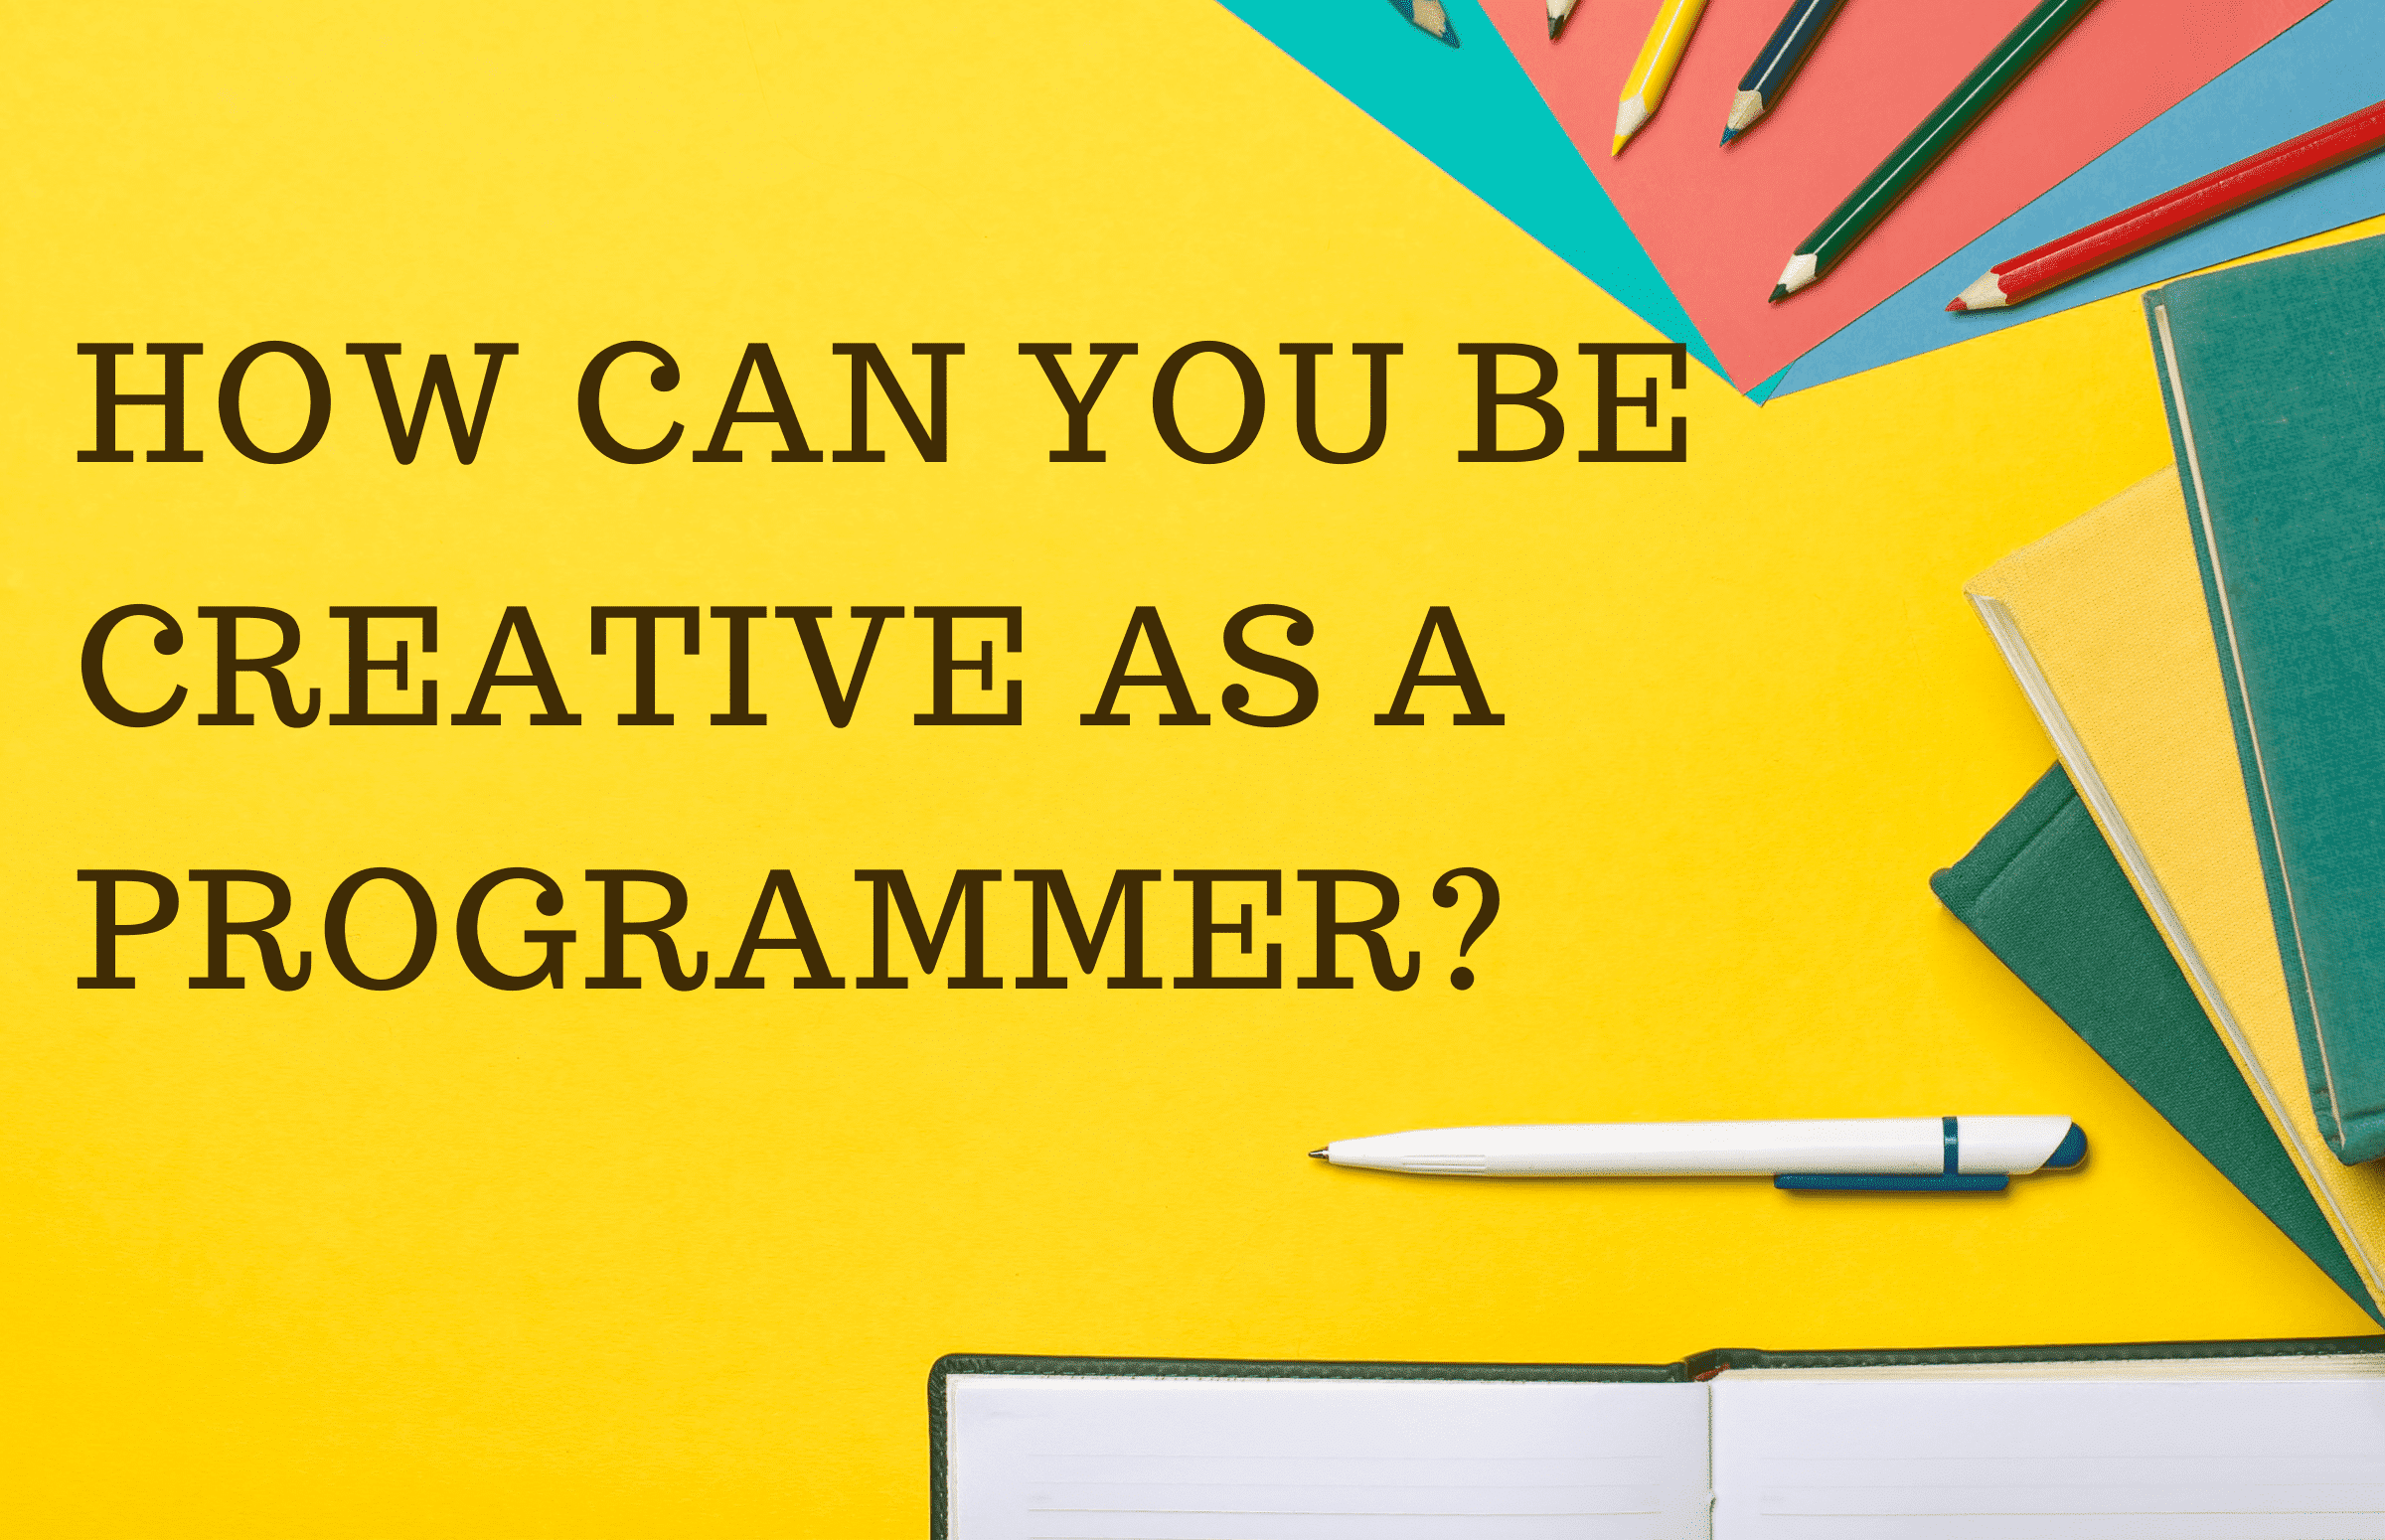 How can you be creative as a programmer?